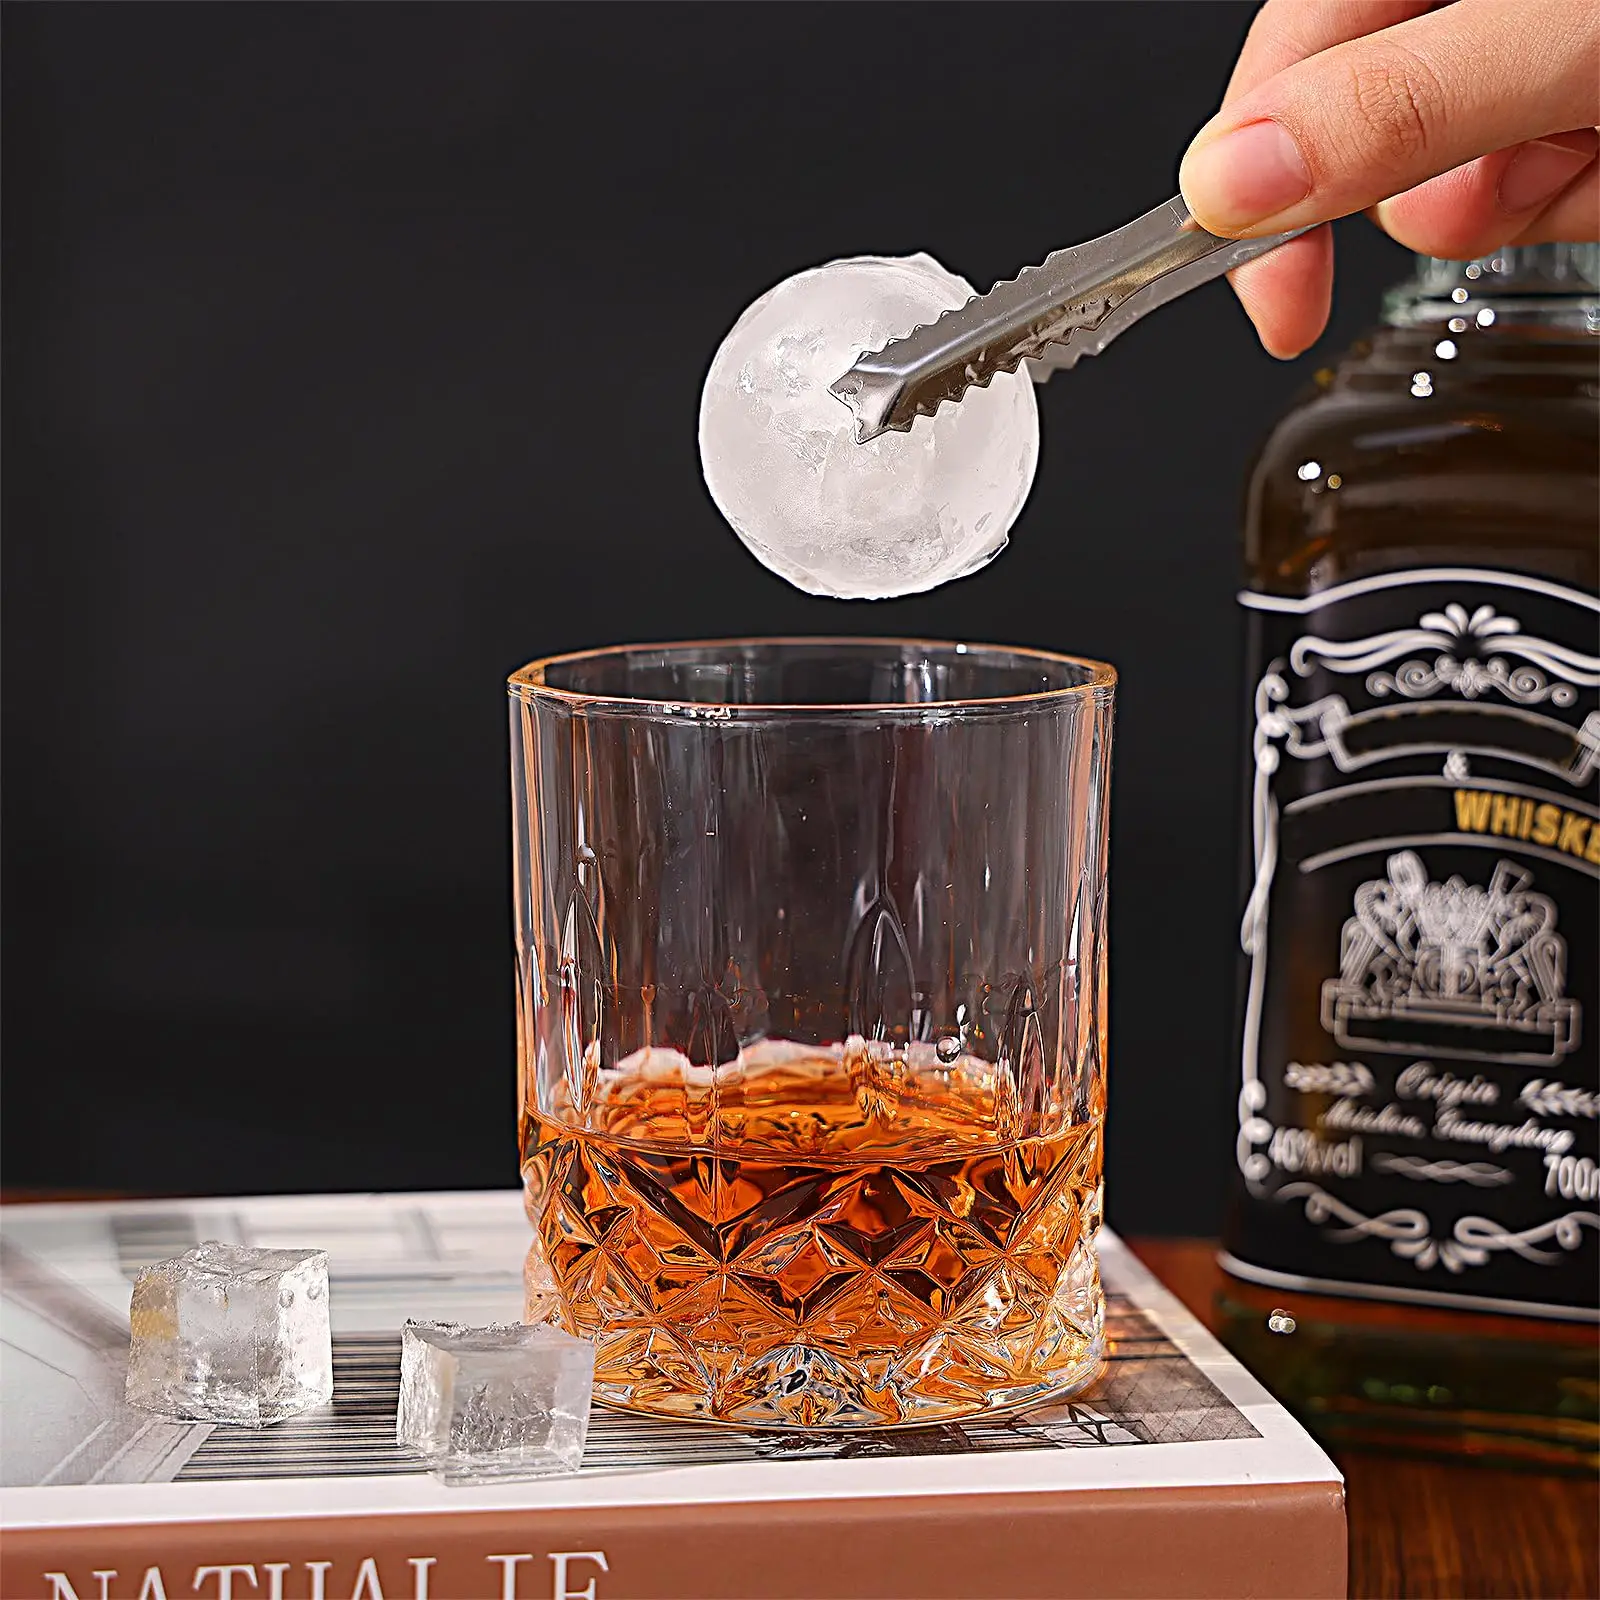 Hot Selling Transparent Fashion Glass Coffee Beer Cups Drinking 6Pcs  Glasses Mugs Set